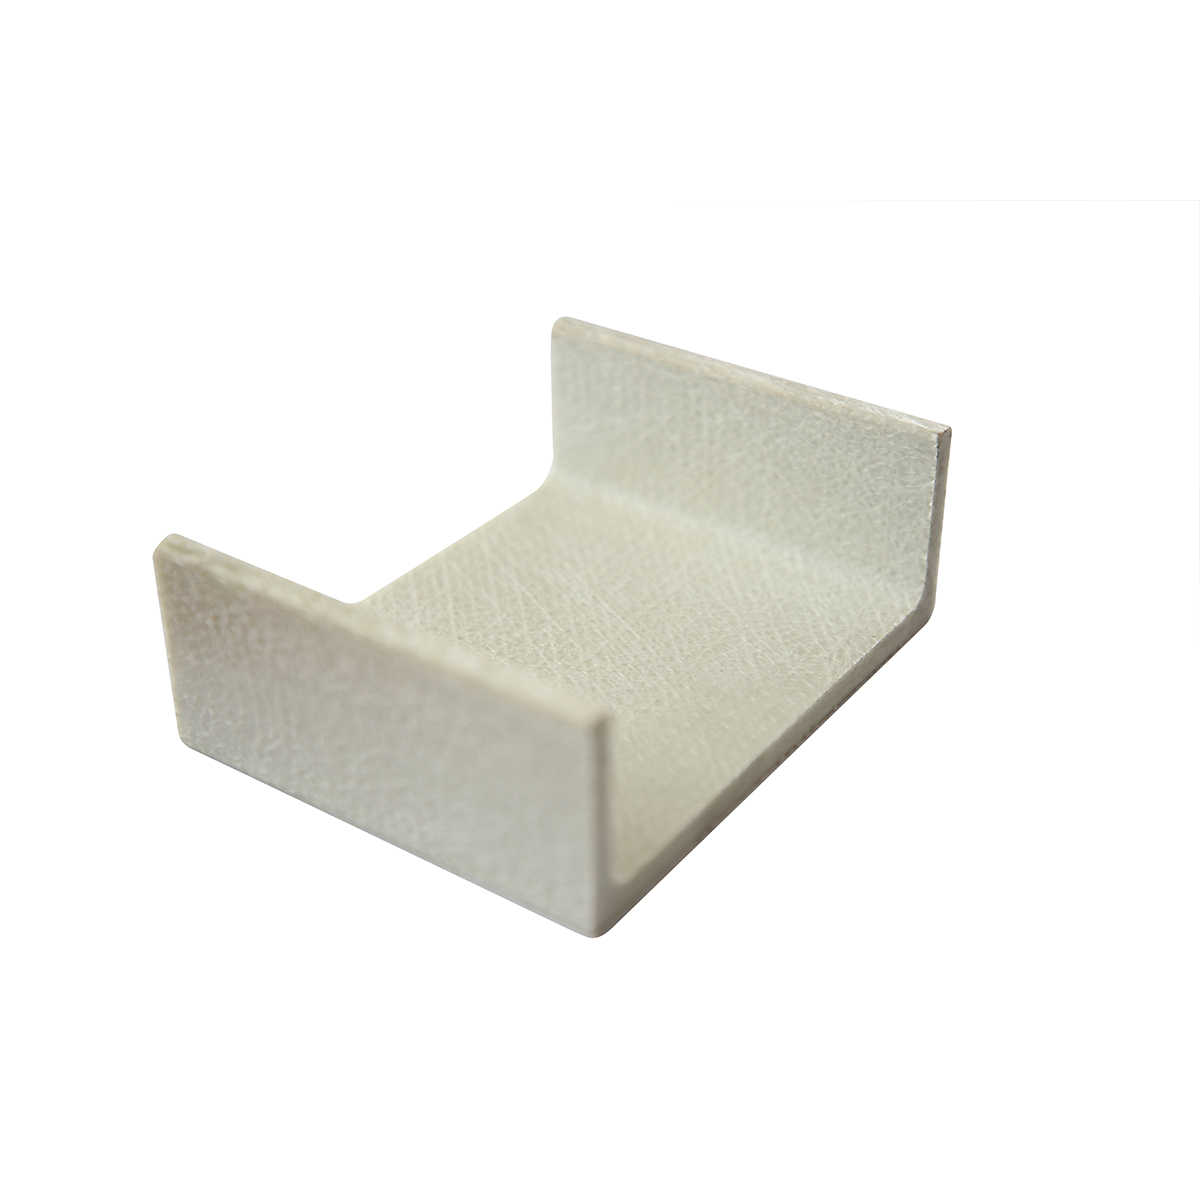 FRP/GRP Pultruded Fiberglass Channels Corrosion & Chemical Resistant